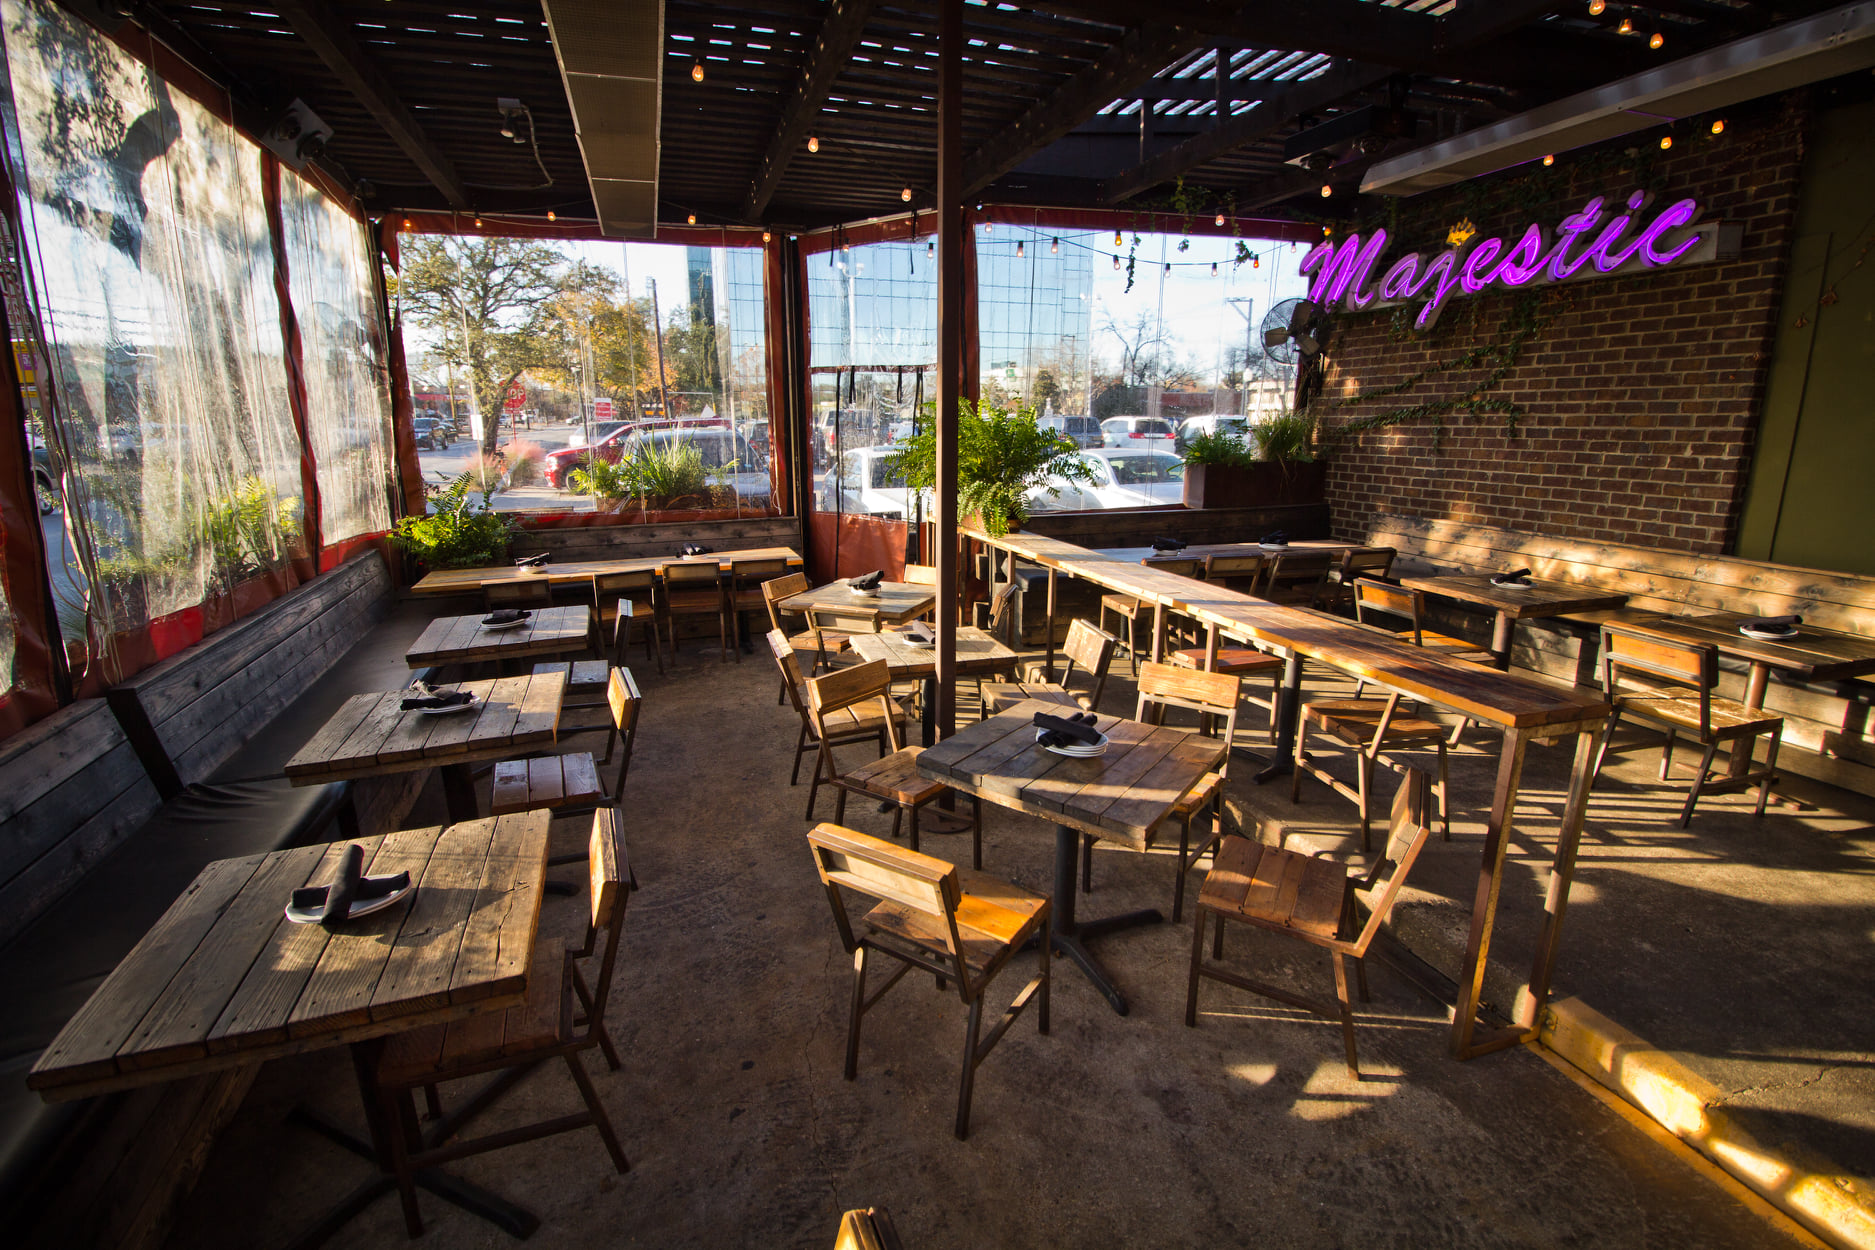 A shaded outdoor patio is furnished with wooden tables. In the background, a pink neon sign reads, “Majestic.”